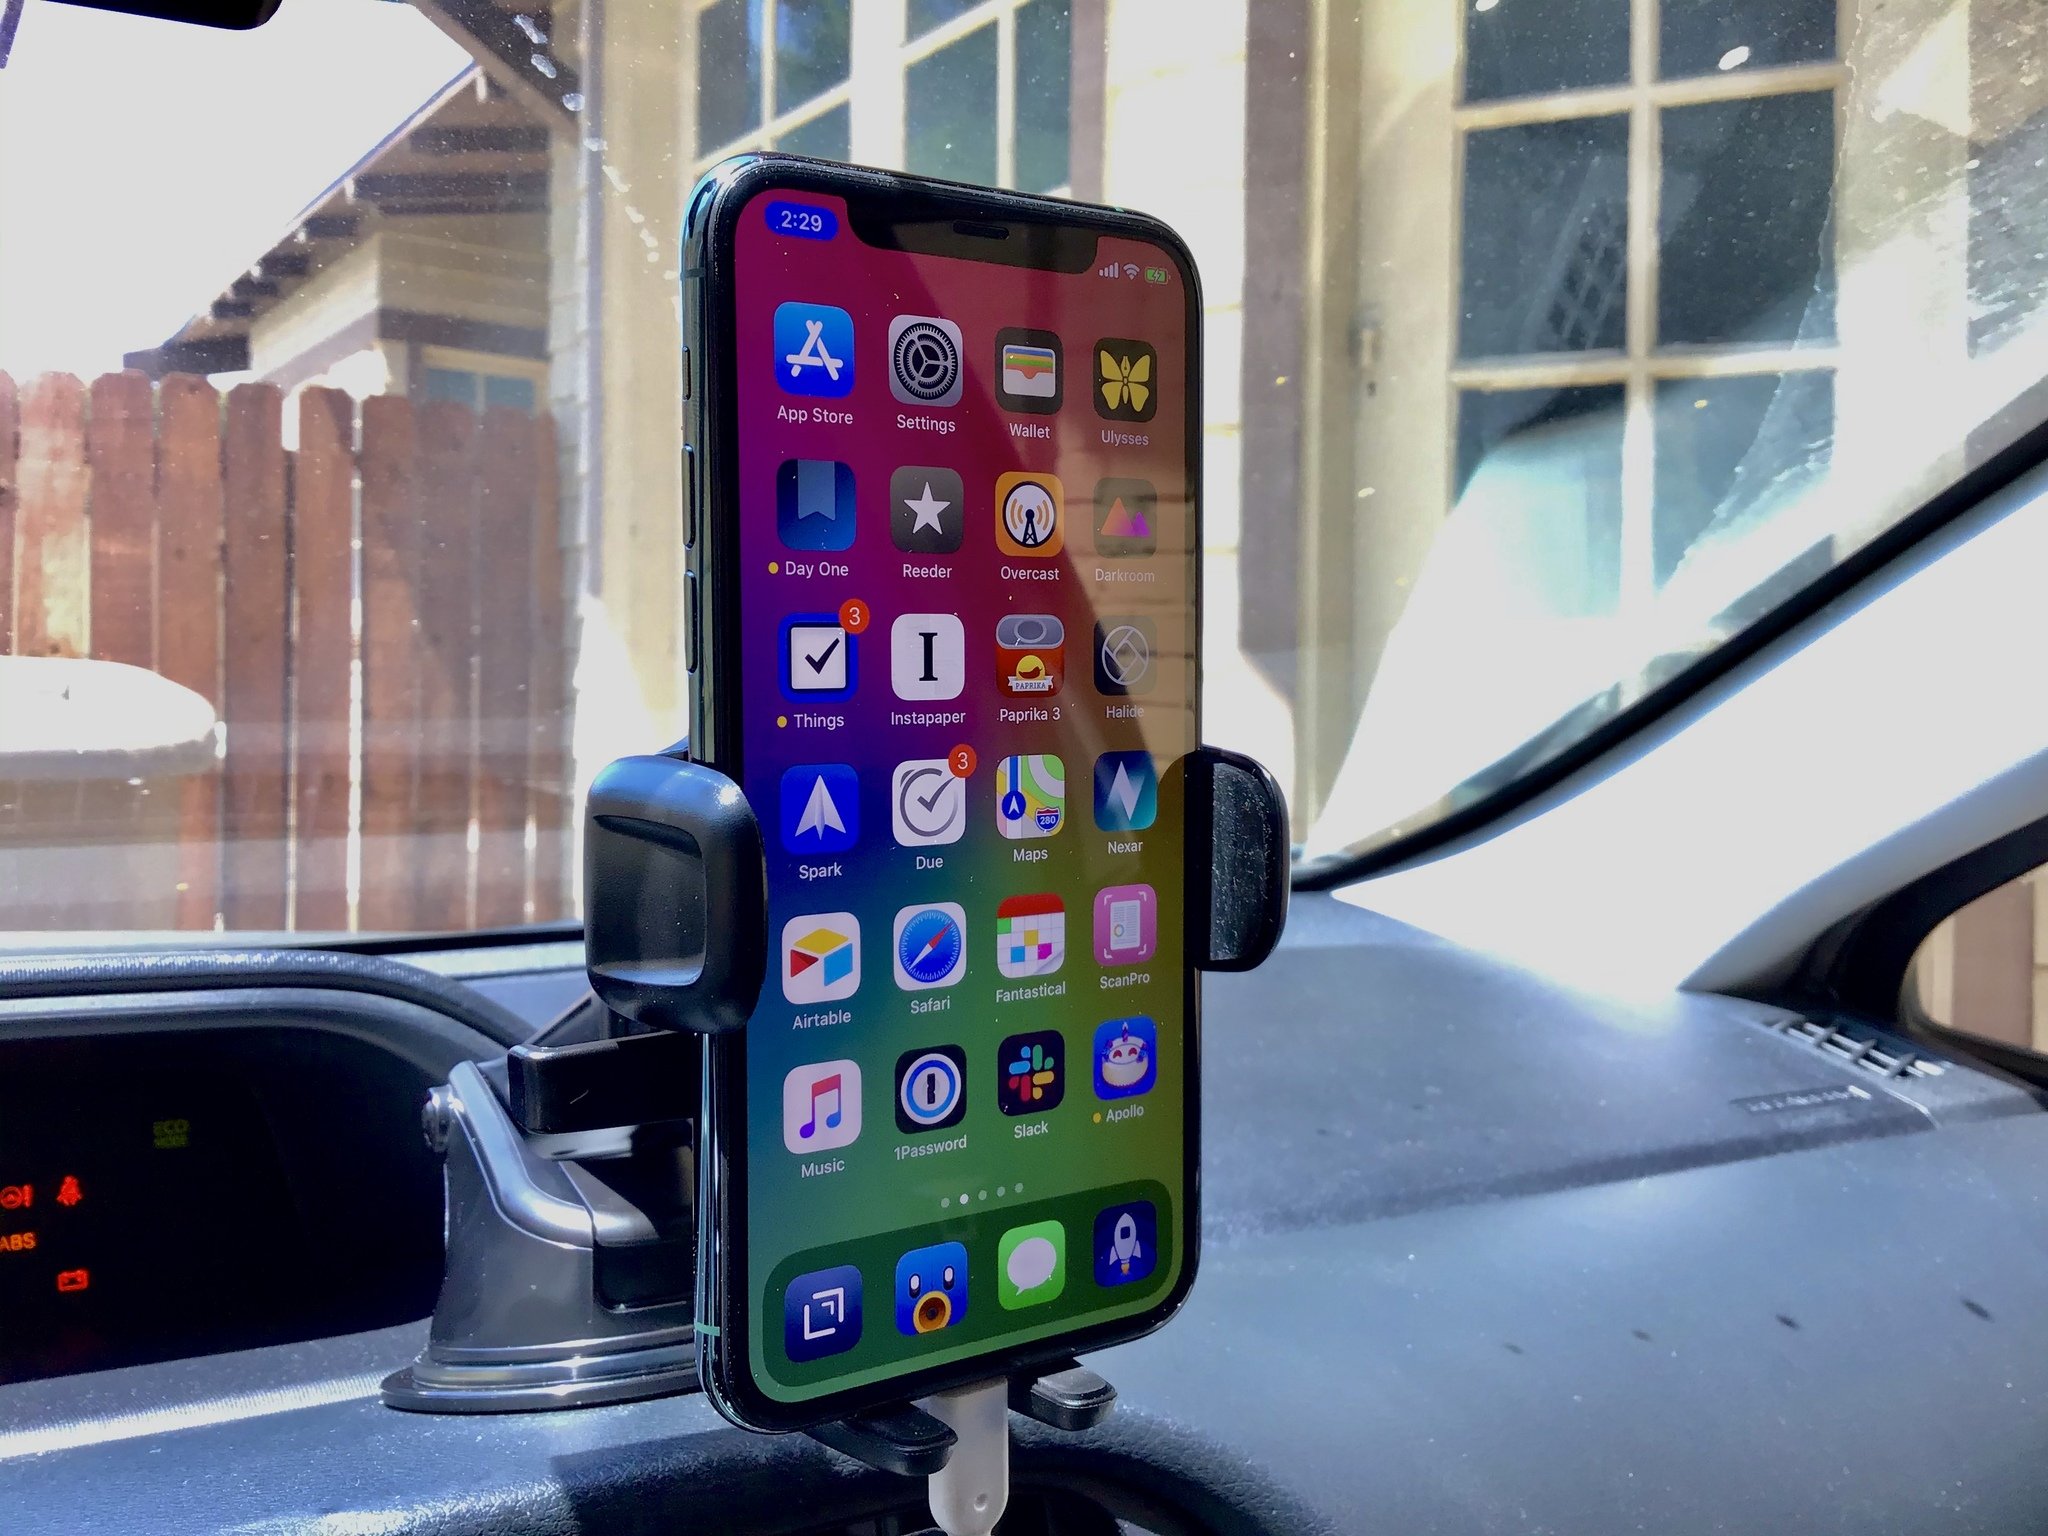 Men Birthday Black Small Father’s Day Stable Lightweight Secure Air Vent Clip Charging Compatible with all Iphones and Android etc Slim AR Car Phone Mount Holder Women Driver Hands free